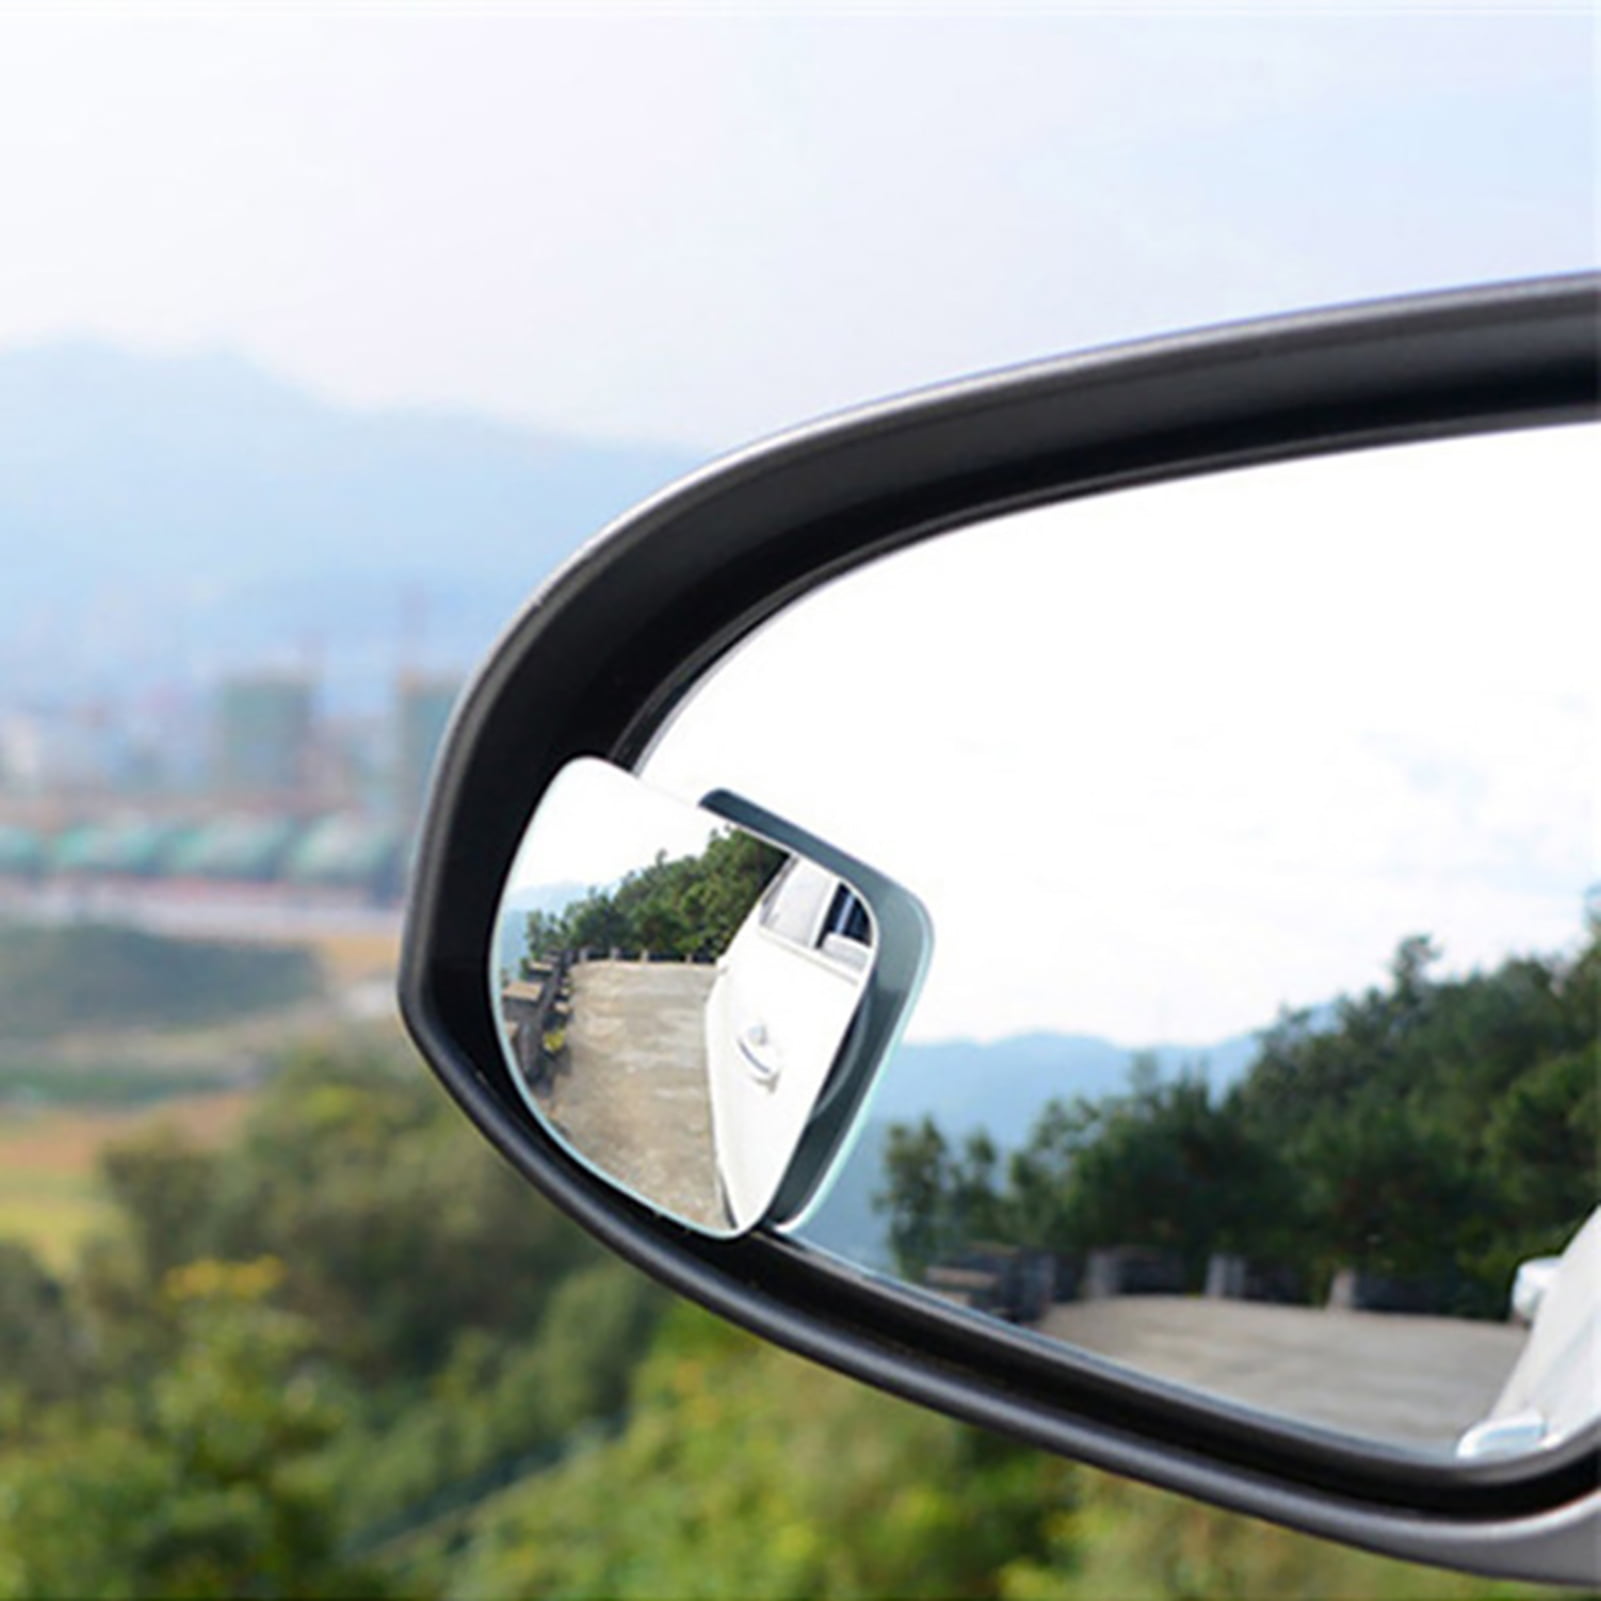  Blind Spot Mirror for Car, Rotatable Auto Side Door Rear View  Mirror, HD Glass Passenger Side Outside View Mirror Stick on Design,  Universal for Car, Truck, SUV, RV, Van : Automotive